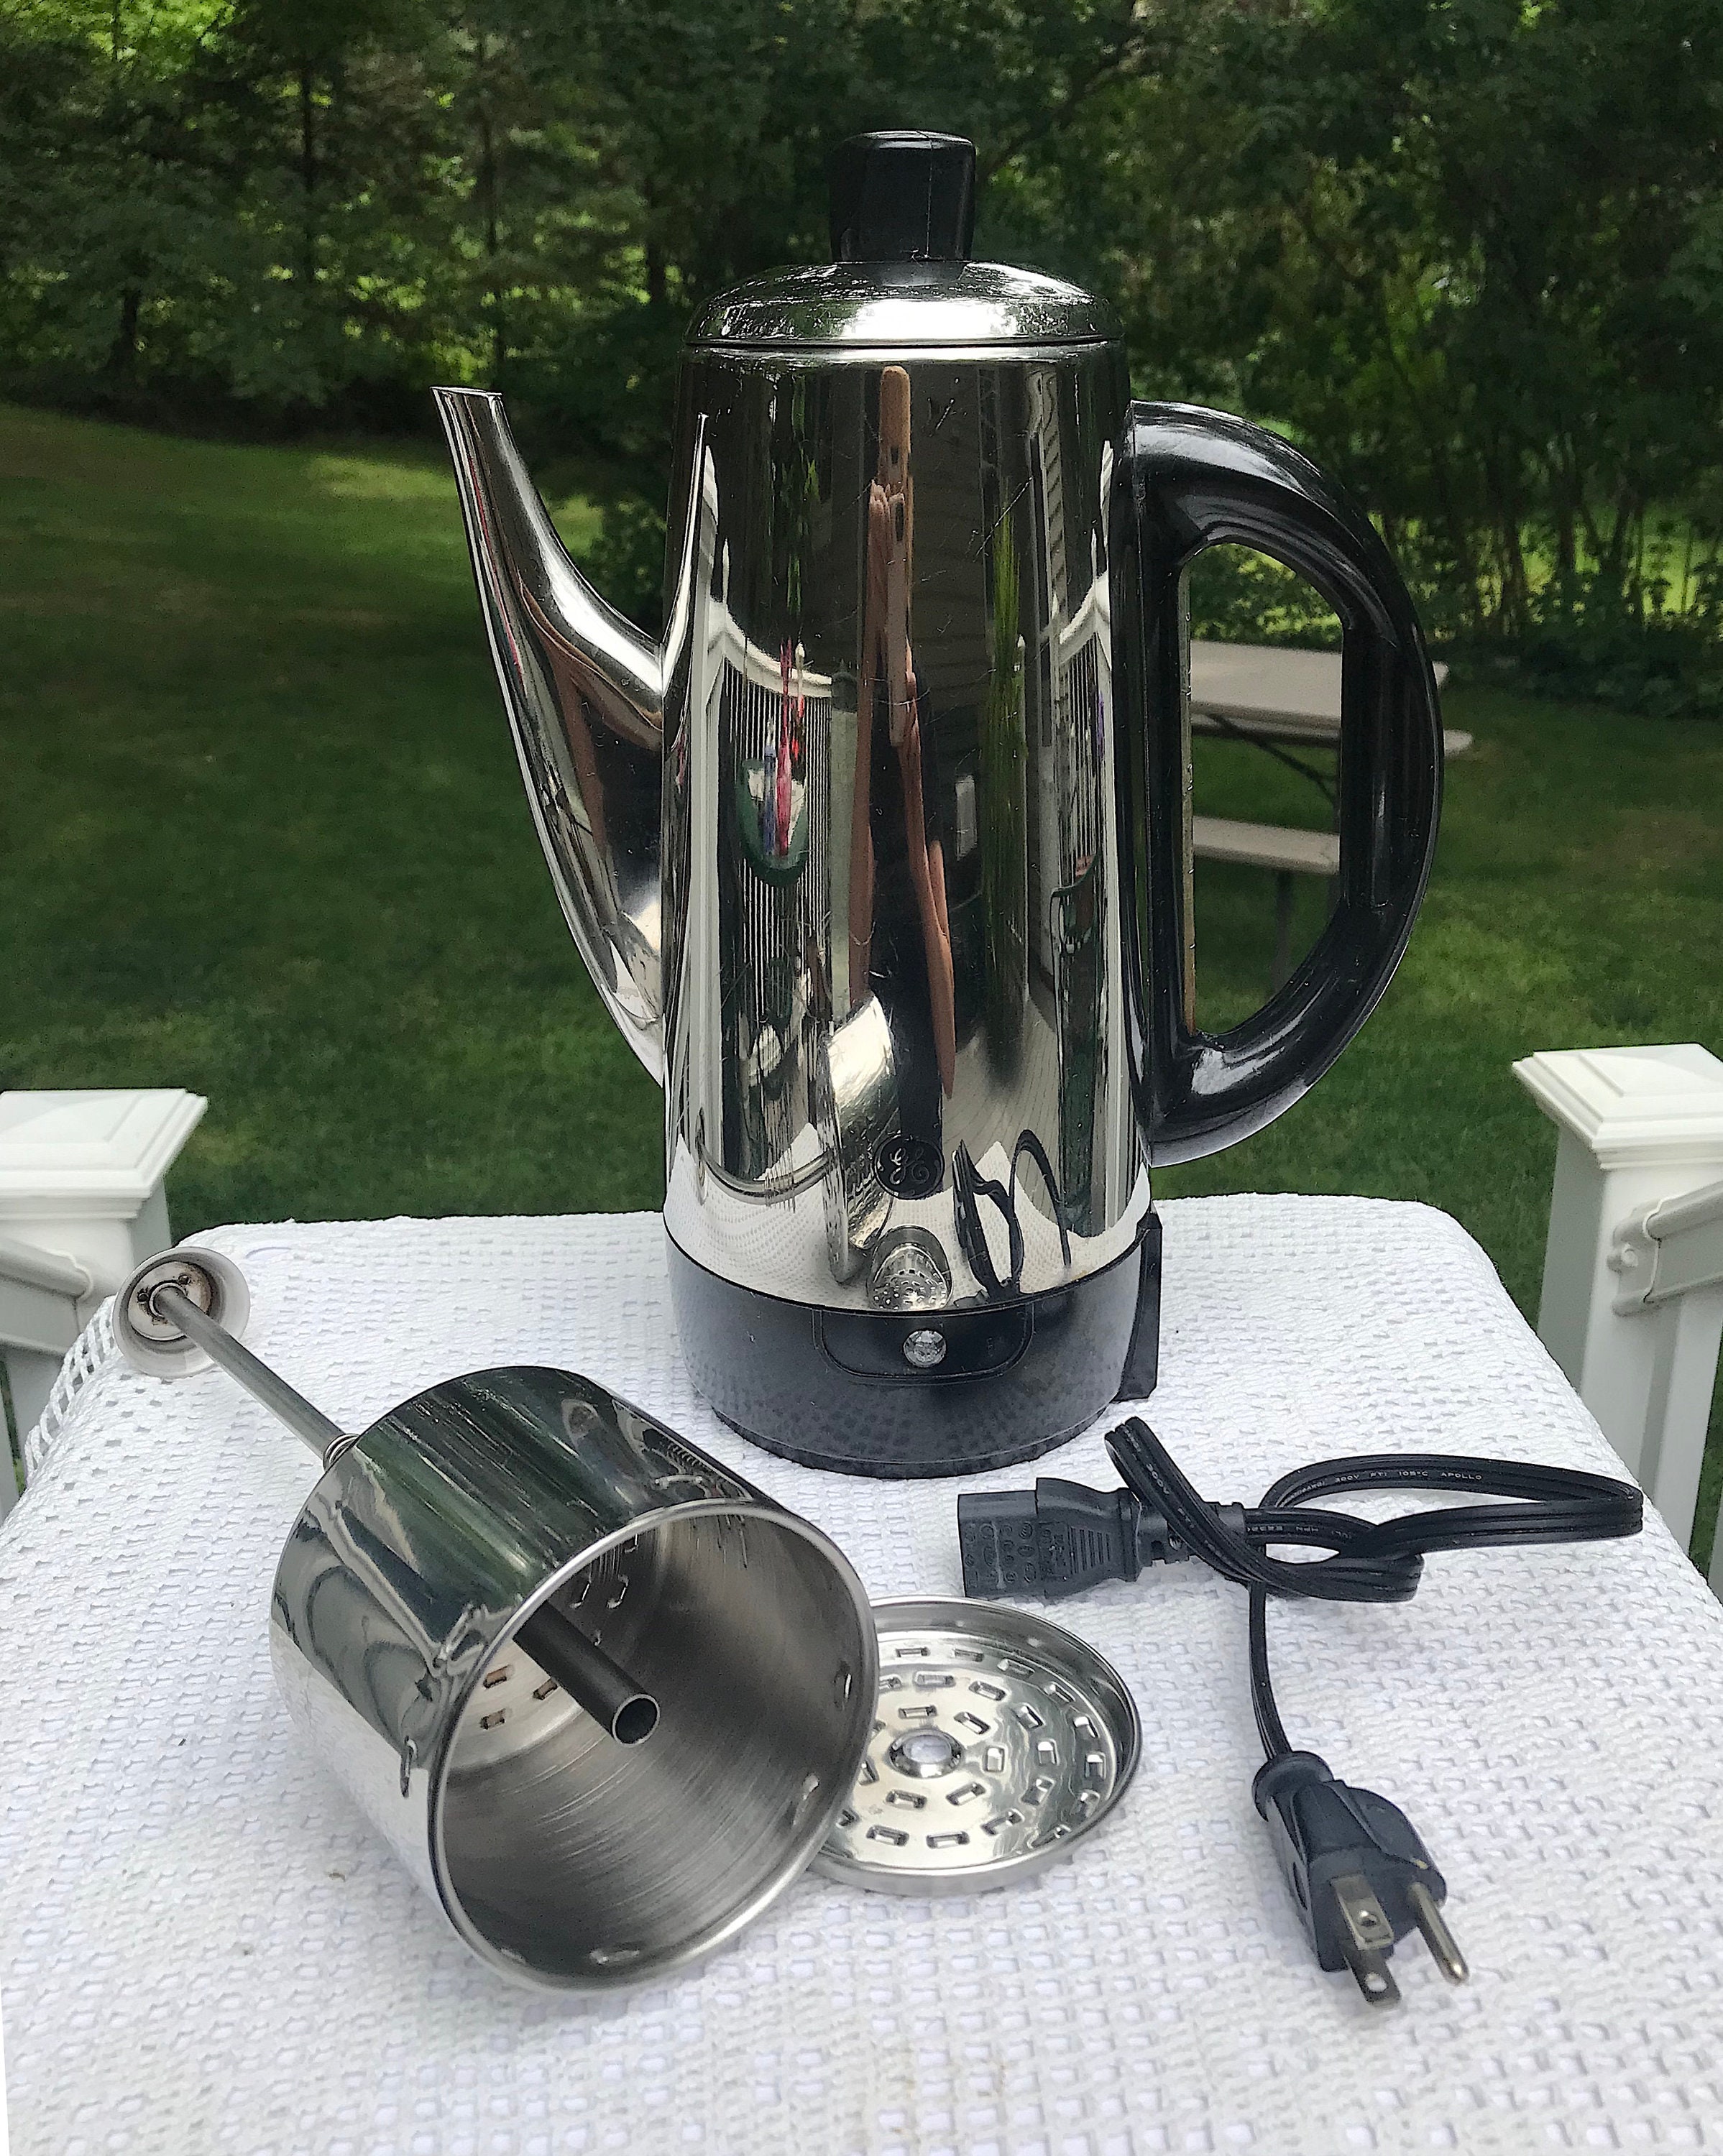 Hamilton Beach Proctor Silex 12 Cup Electric Coffee Percolator Model 40616  Stainless Steel Tested Working Complete 